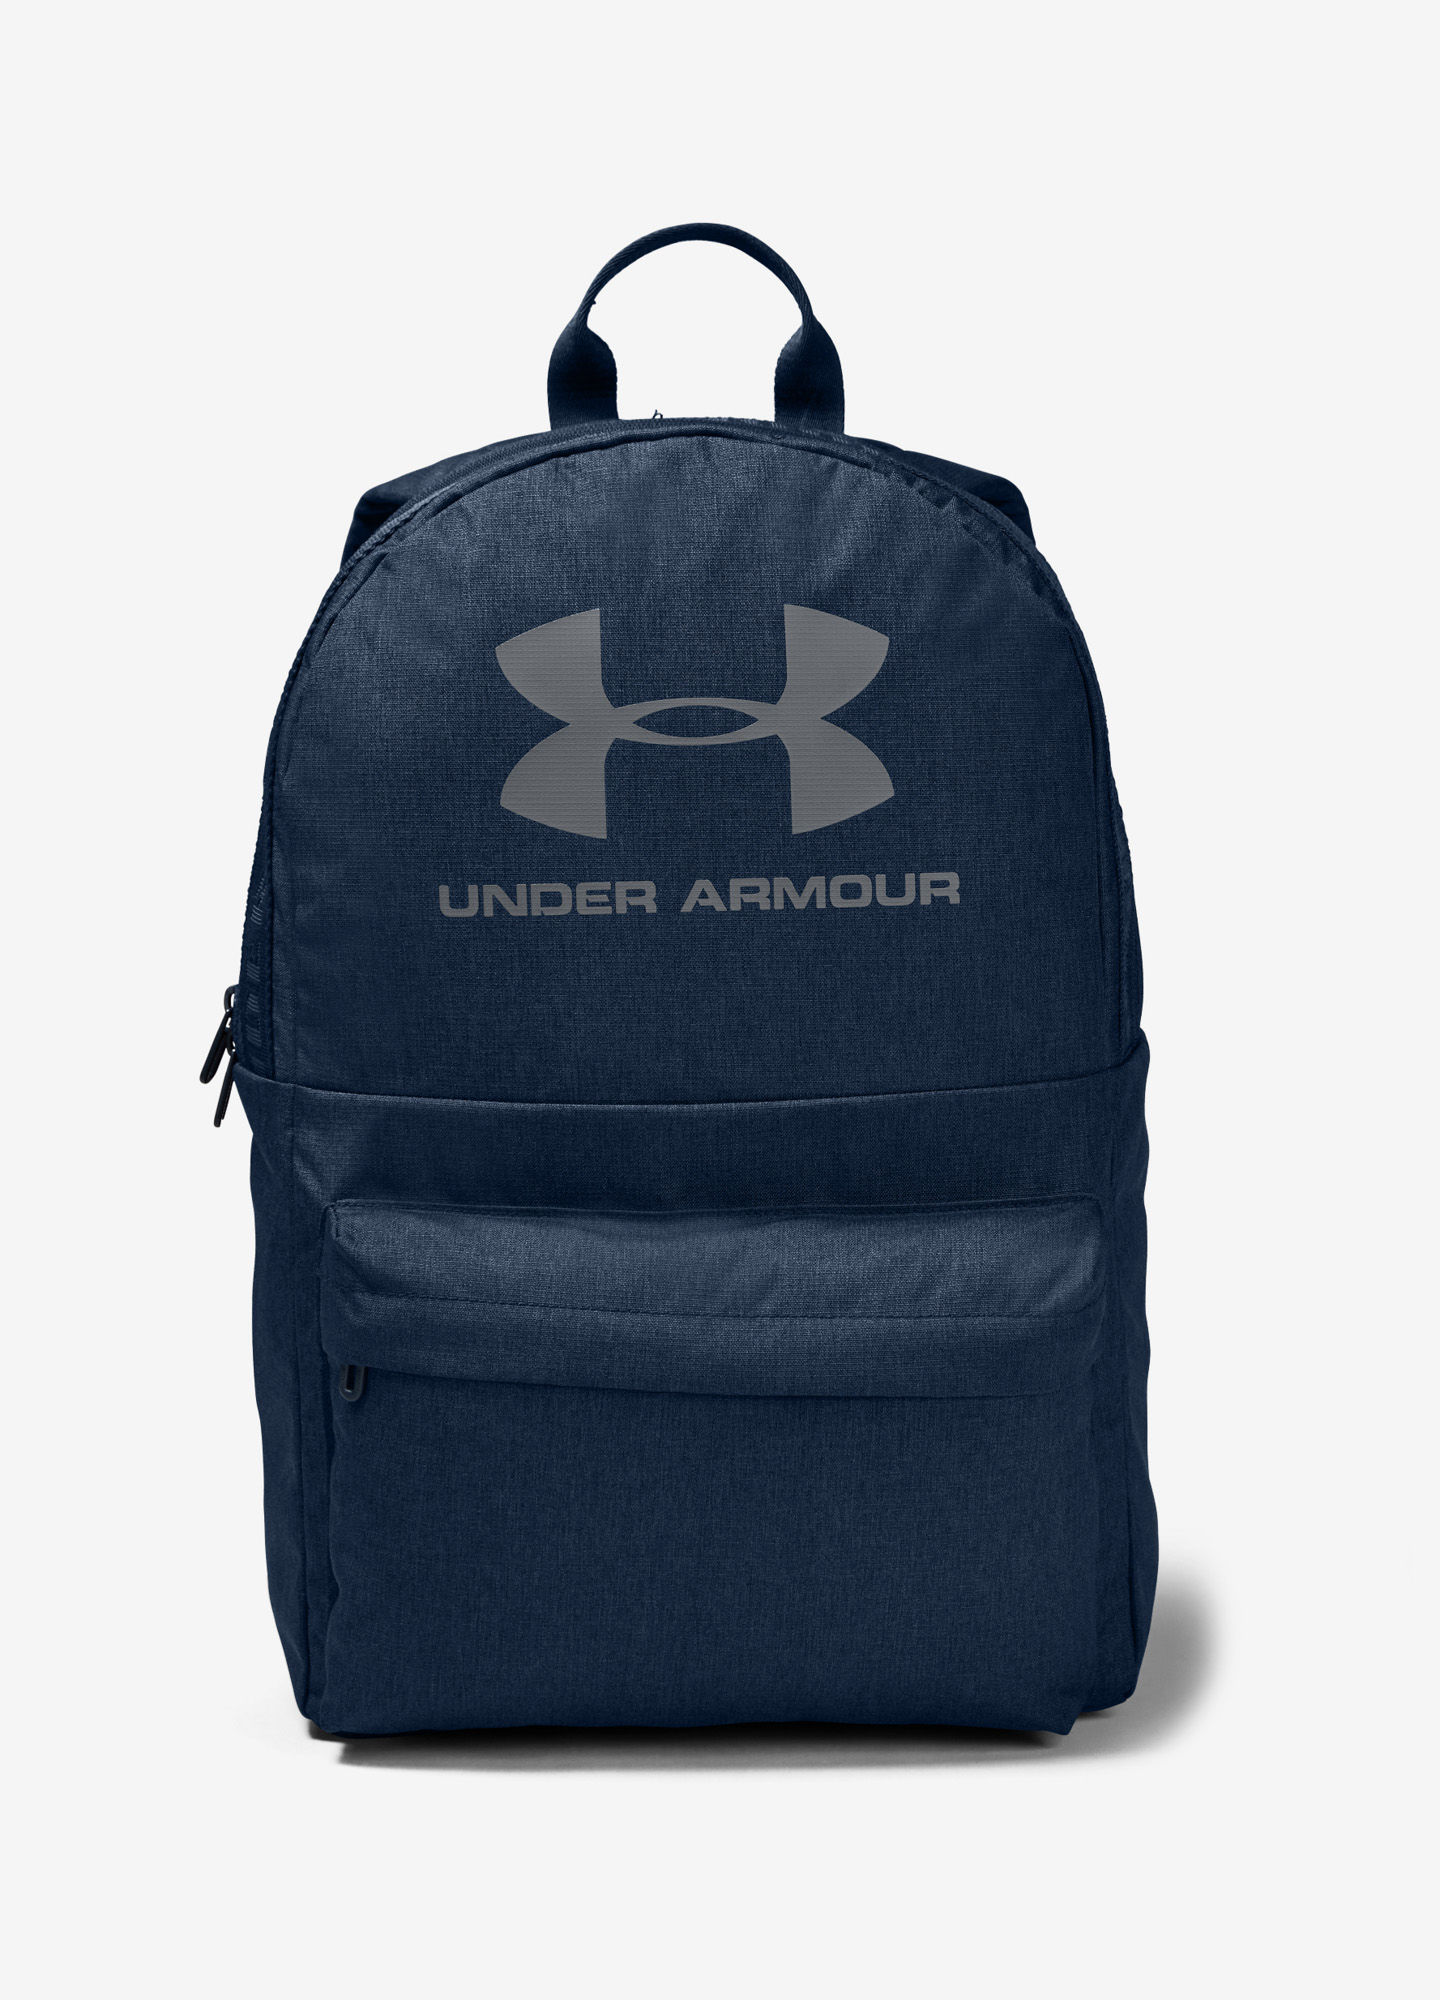 Batoh Under Armour Loudon Backpack-NVY (1)